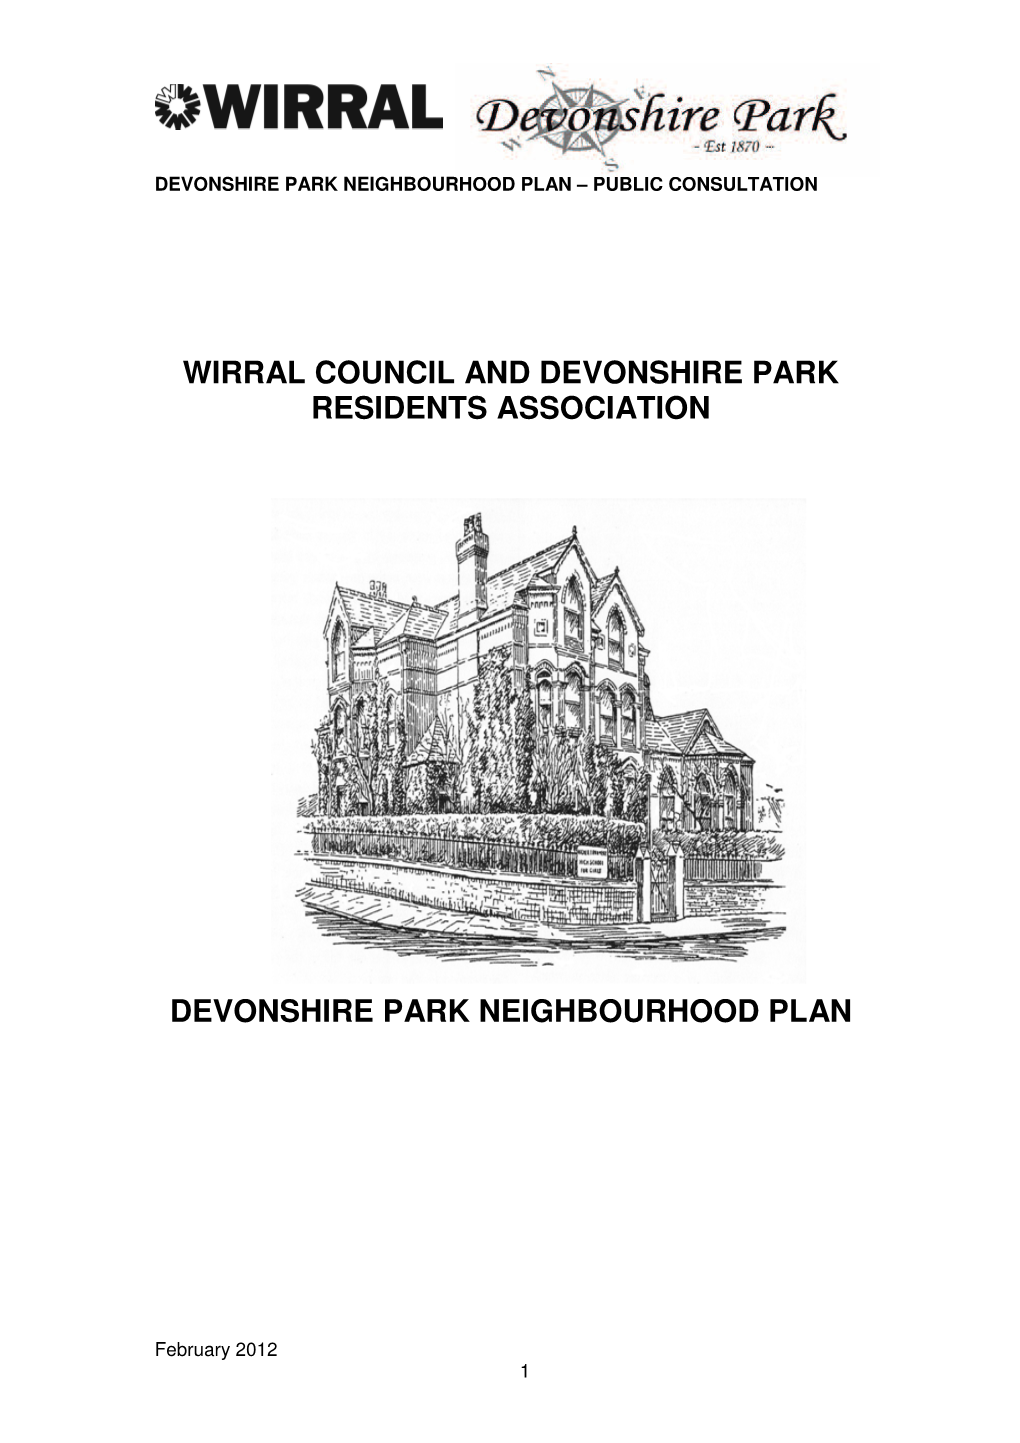 Wirral Council and Devonshire Park Residents Association